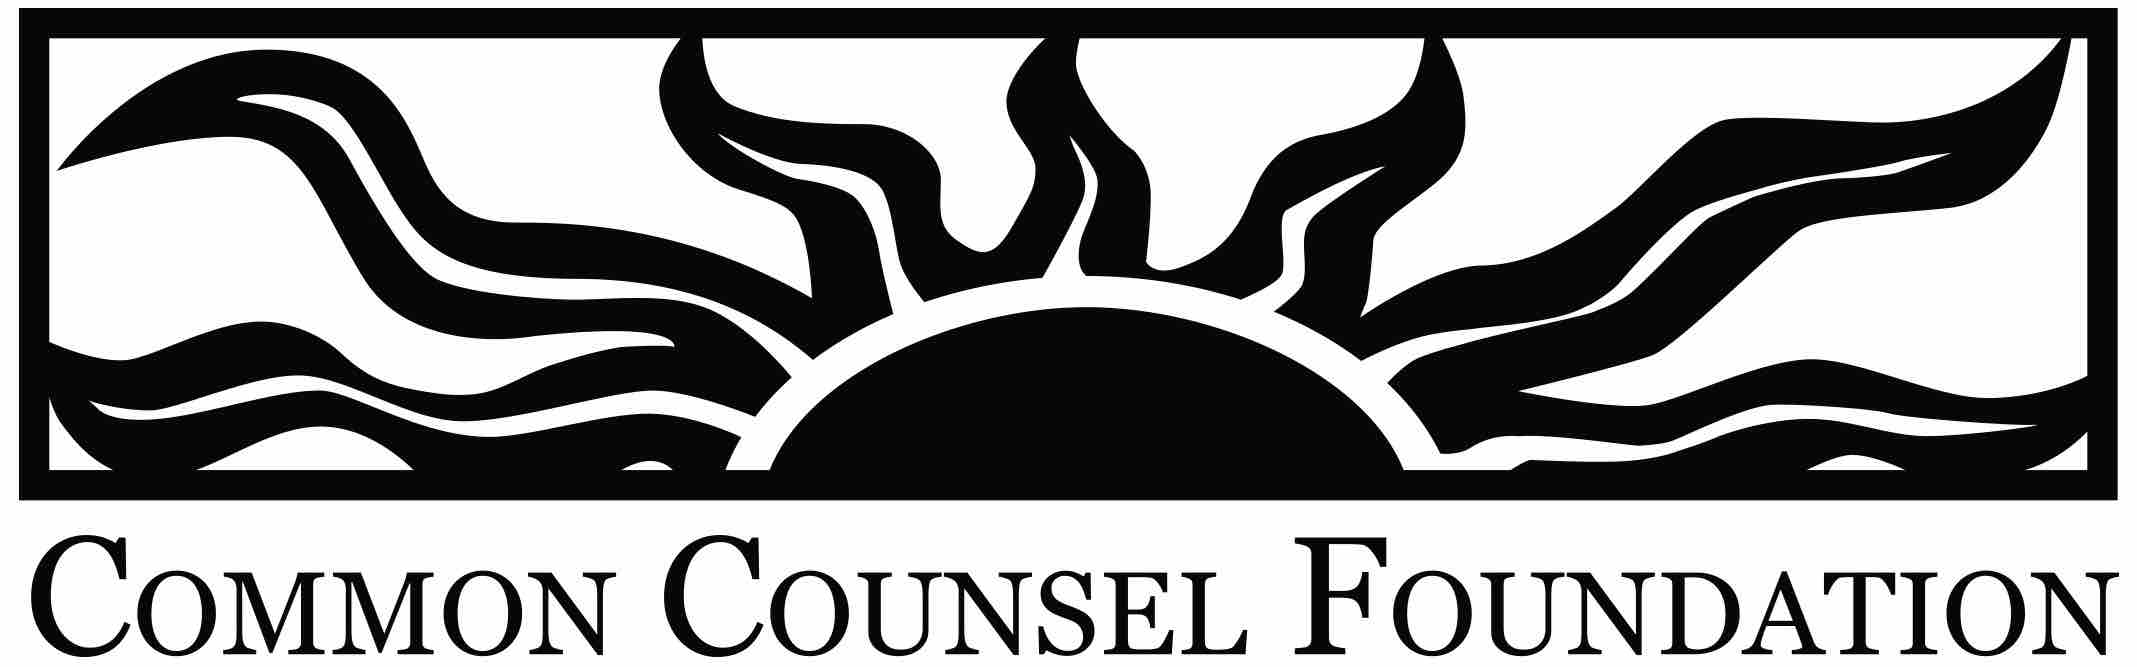 Common Counsel Foundation